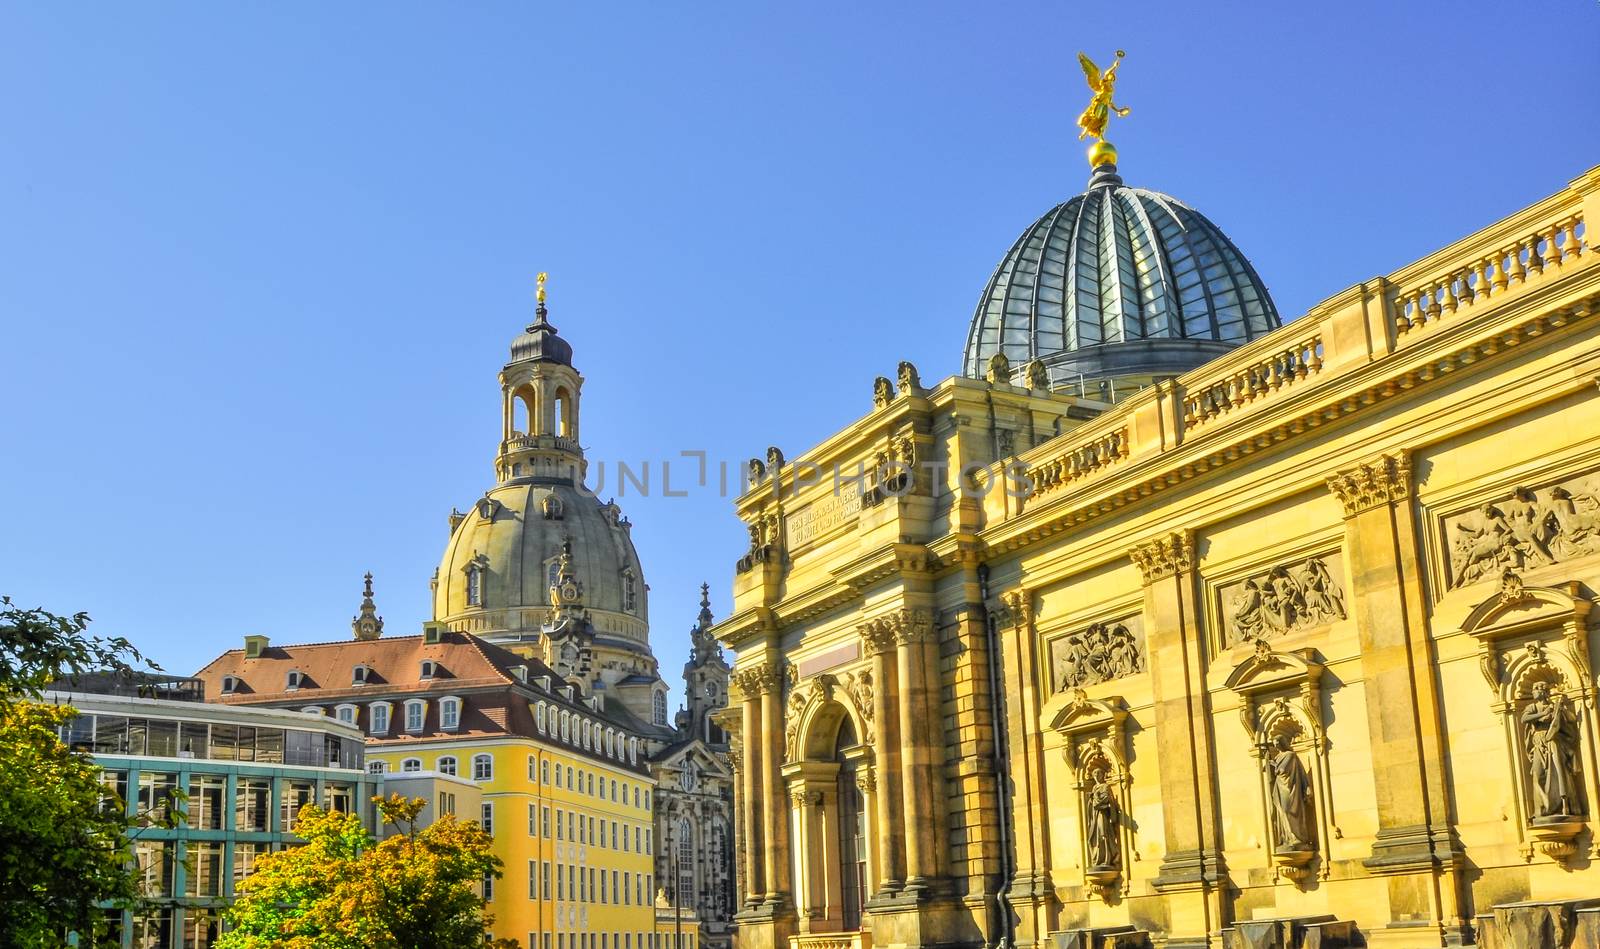 Church Frauenkirche couple in Dresden Germany on a sunny day with blue